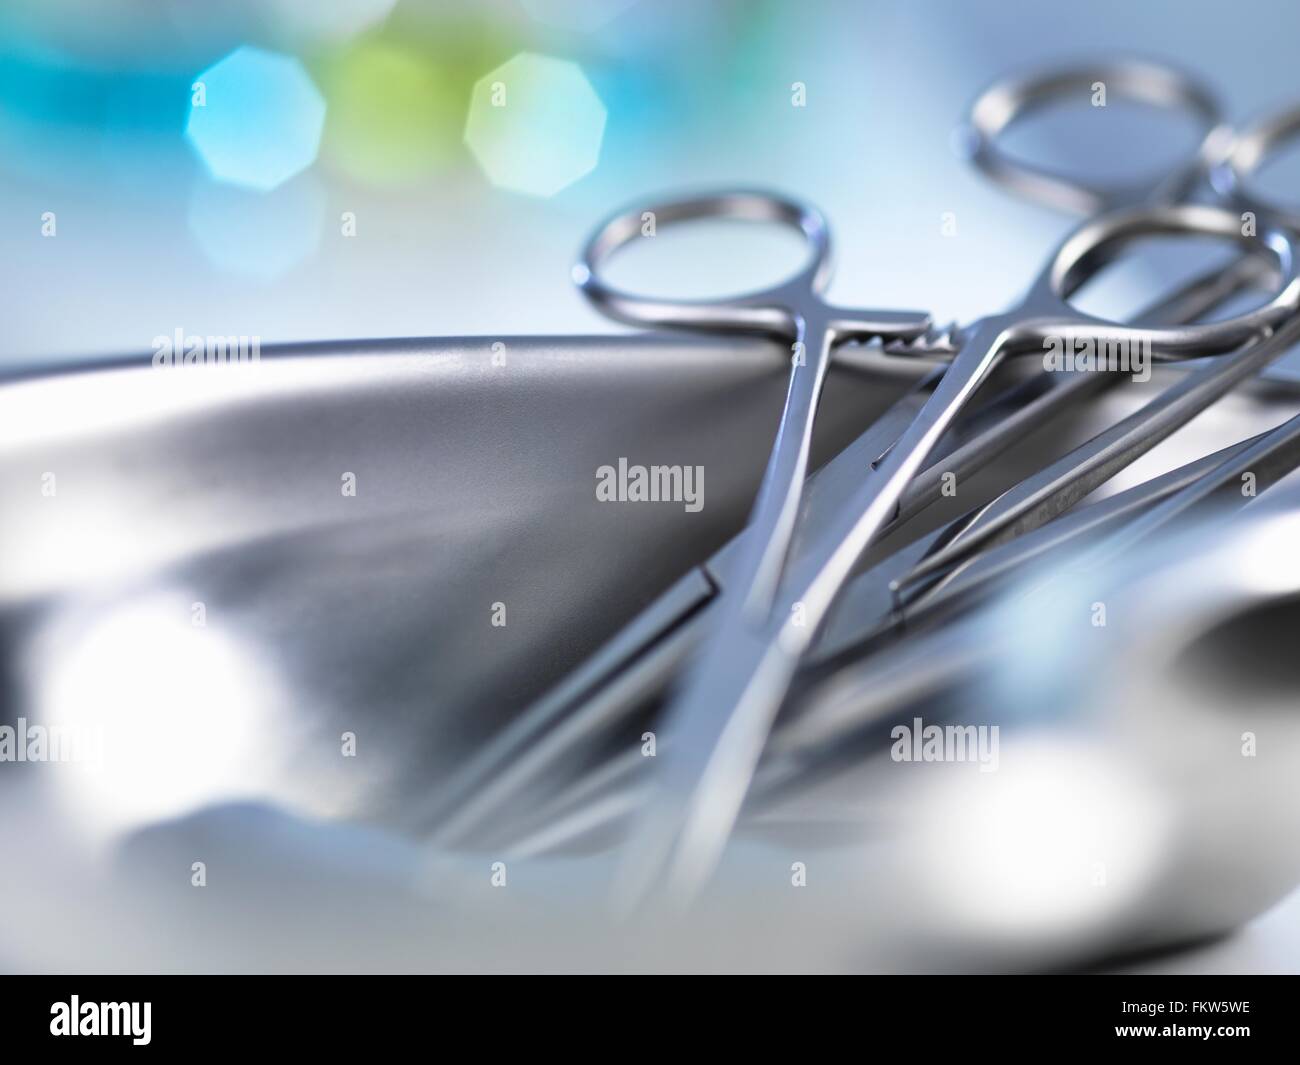 Tray with surgical scissors Stock Photo